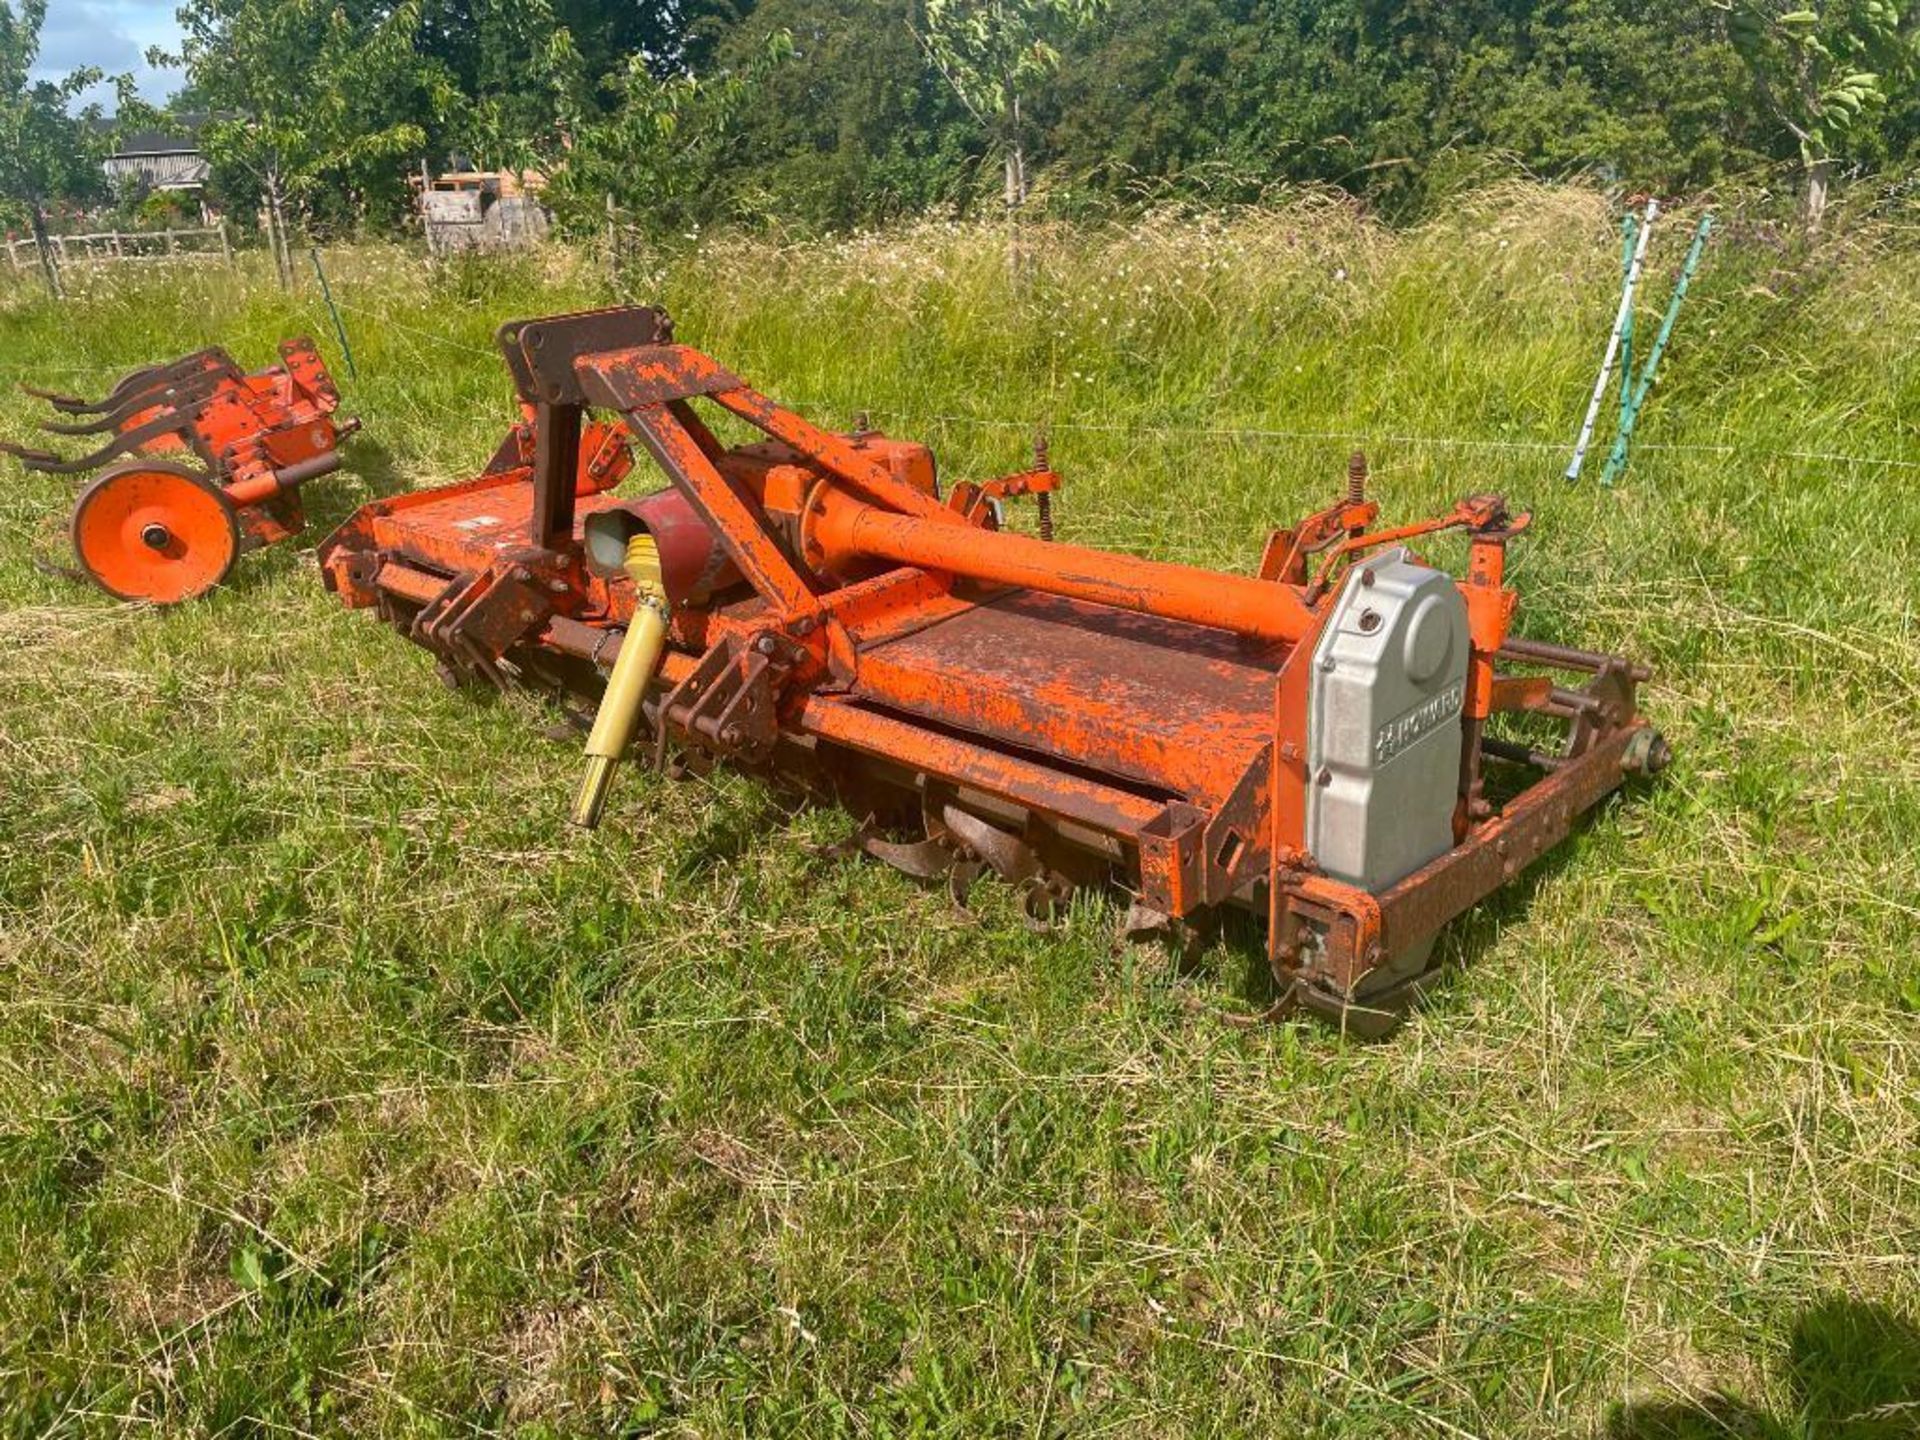 Howard HB100 8' 9" rotavator with rear crumbler, PTO driven, linkage mounted. Serial No: 802A4581 ​​ - Image 2 of 10